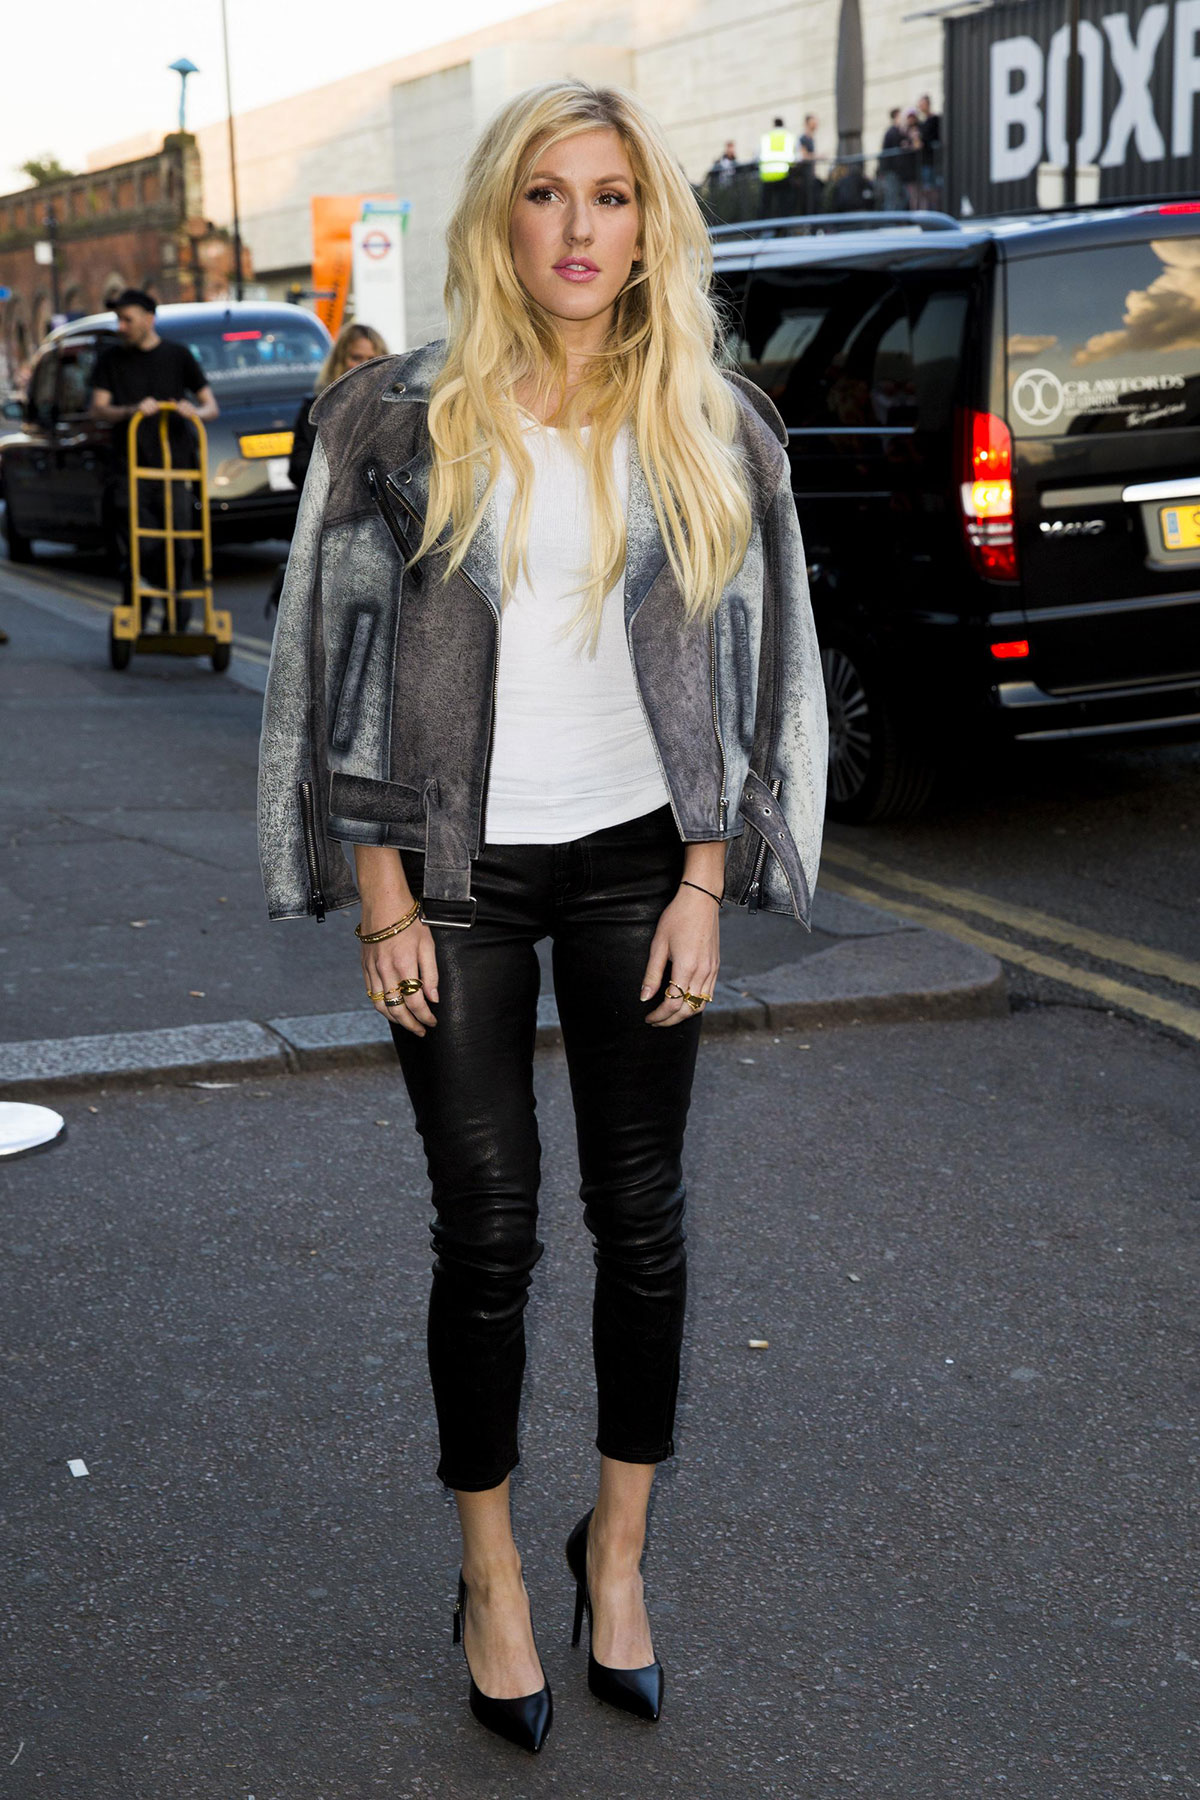 Ellie Goulding attends David Beckham For H&M Swimwear Private Launch